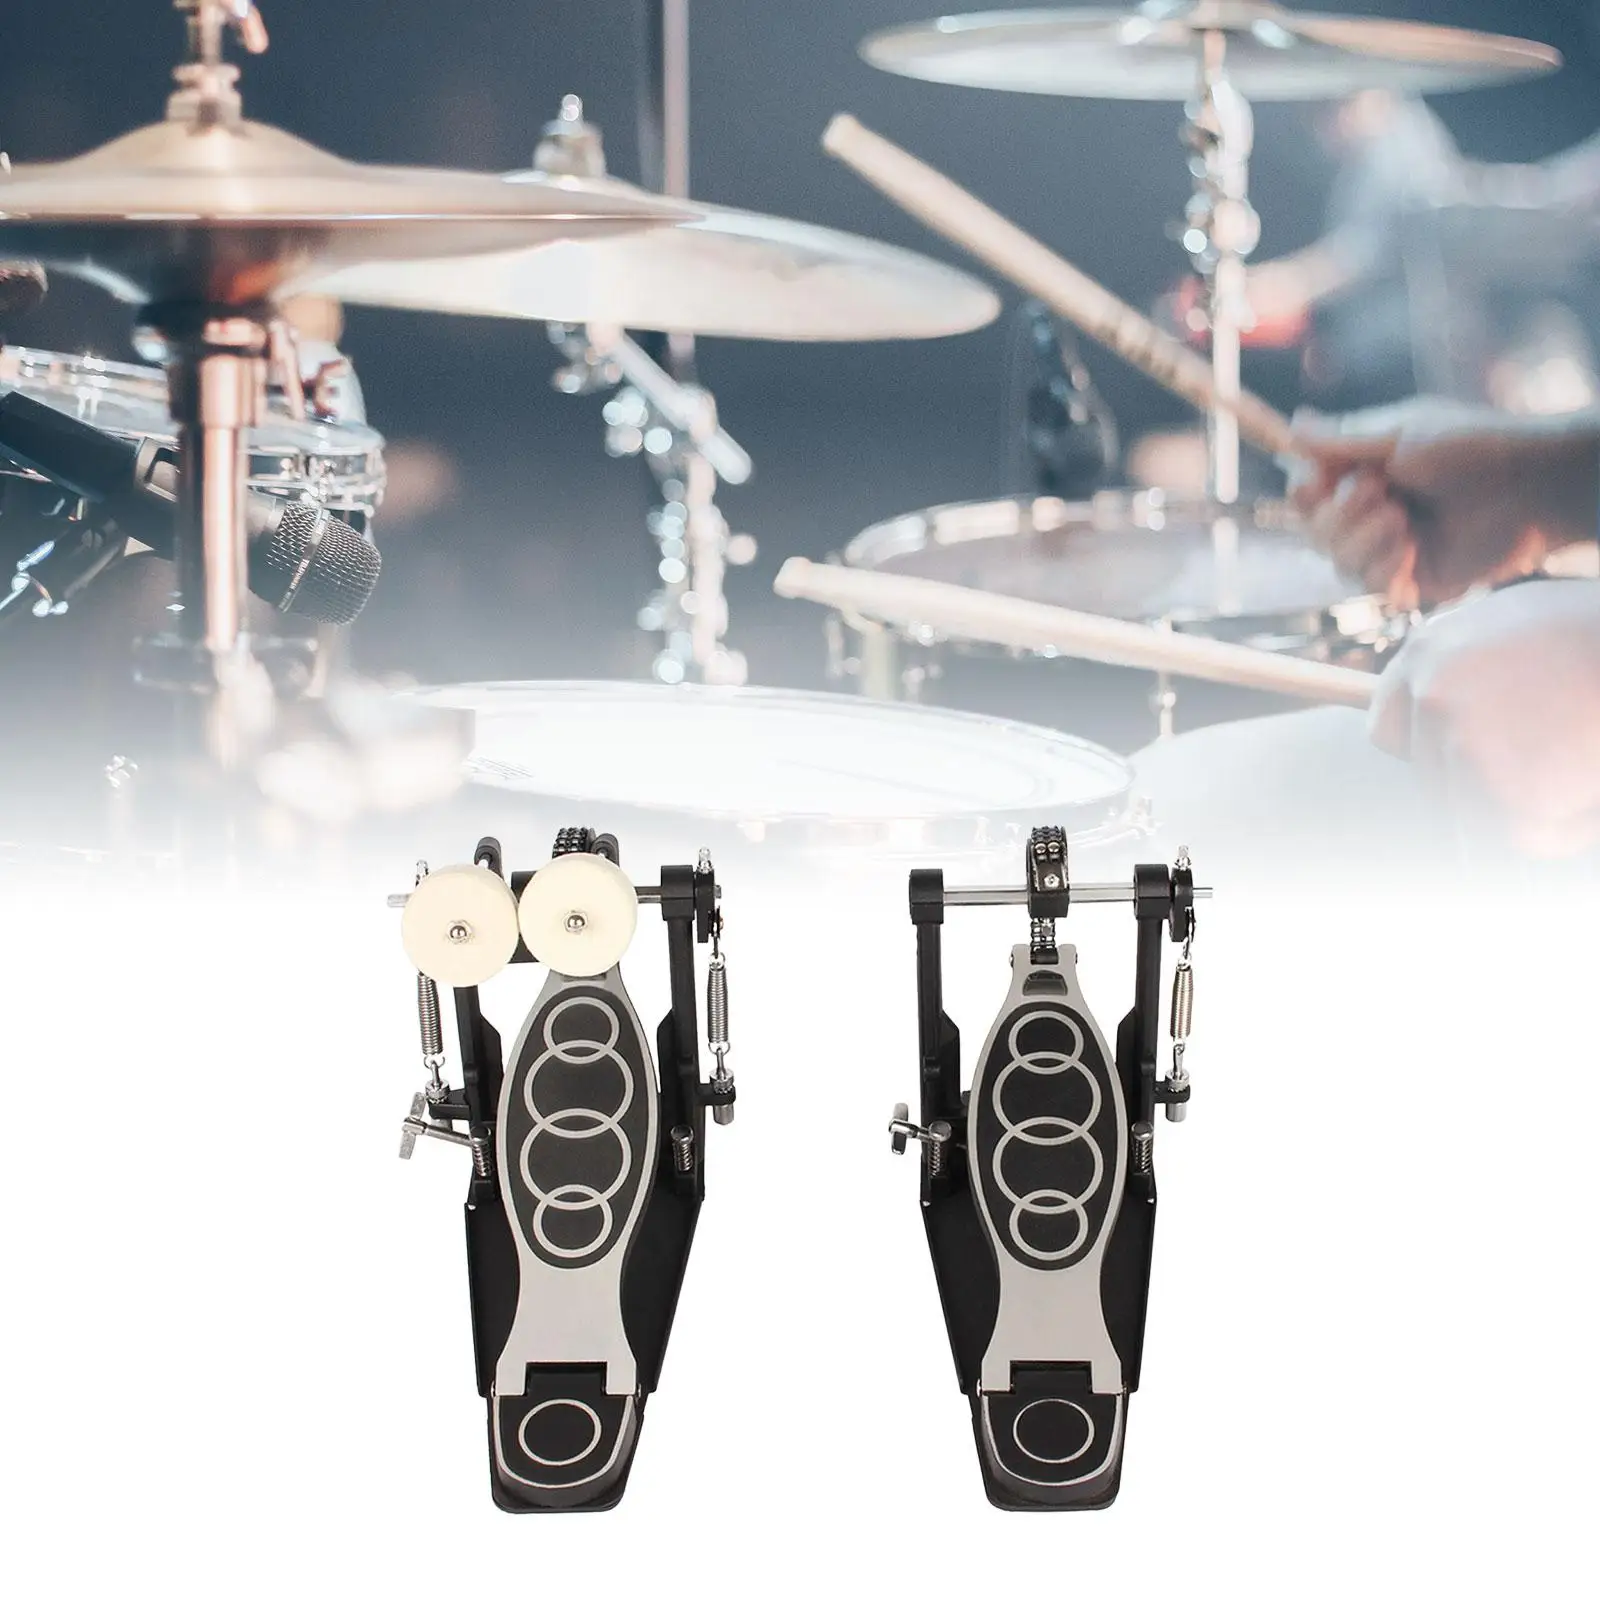 Dual Pedal Two Chain Drive Percussion Hardware Twin Drum Pedal for Drummers Electronic Drum Lovers Jazz Drums Kick Drum Set